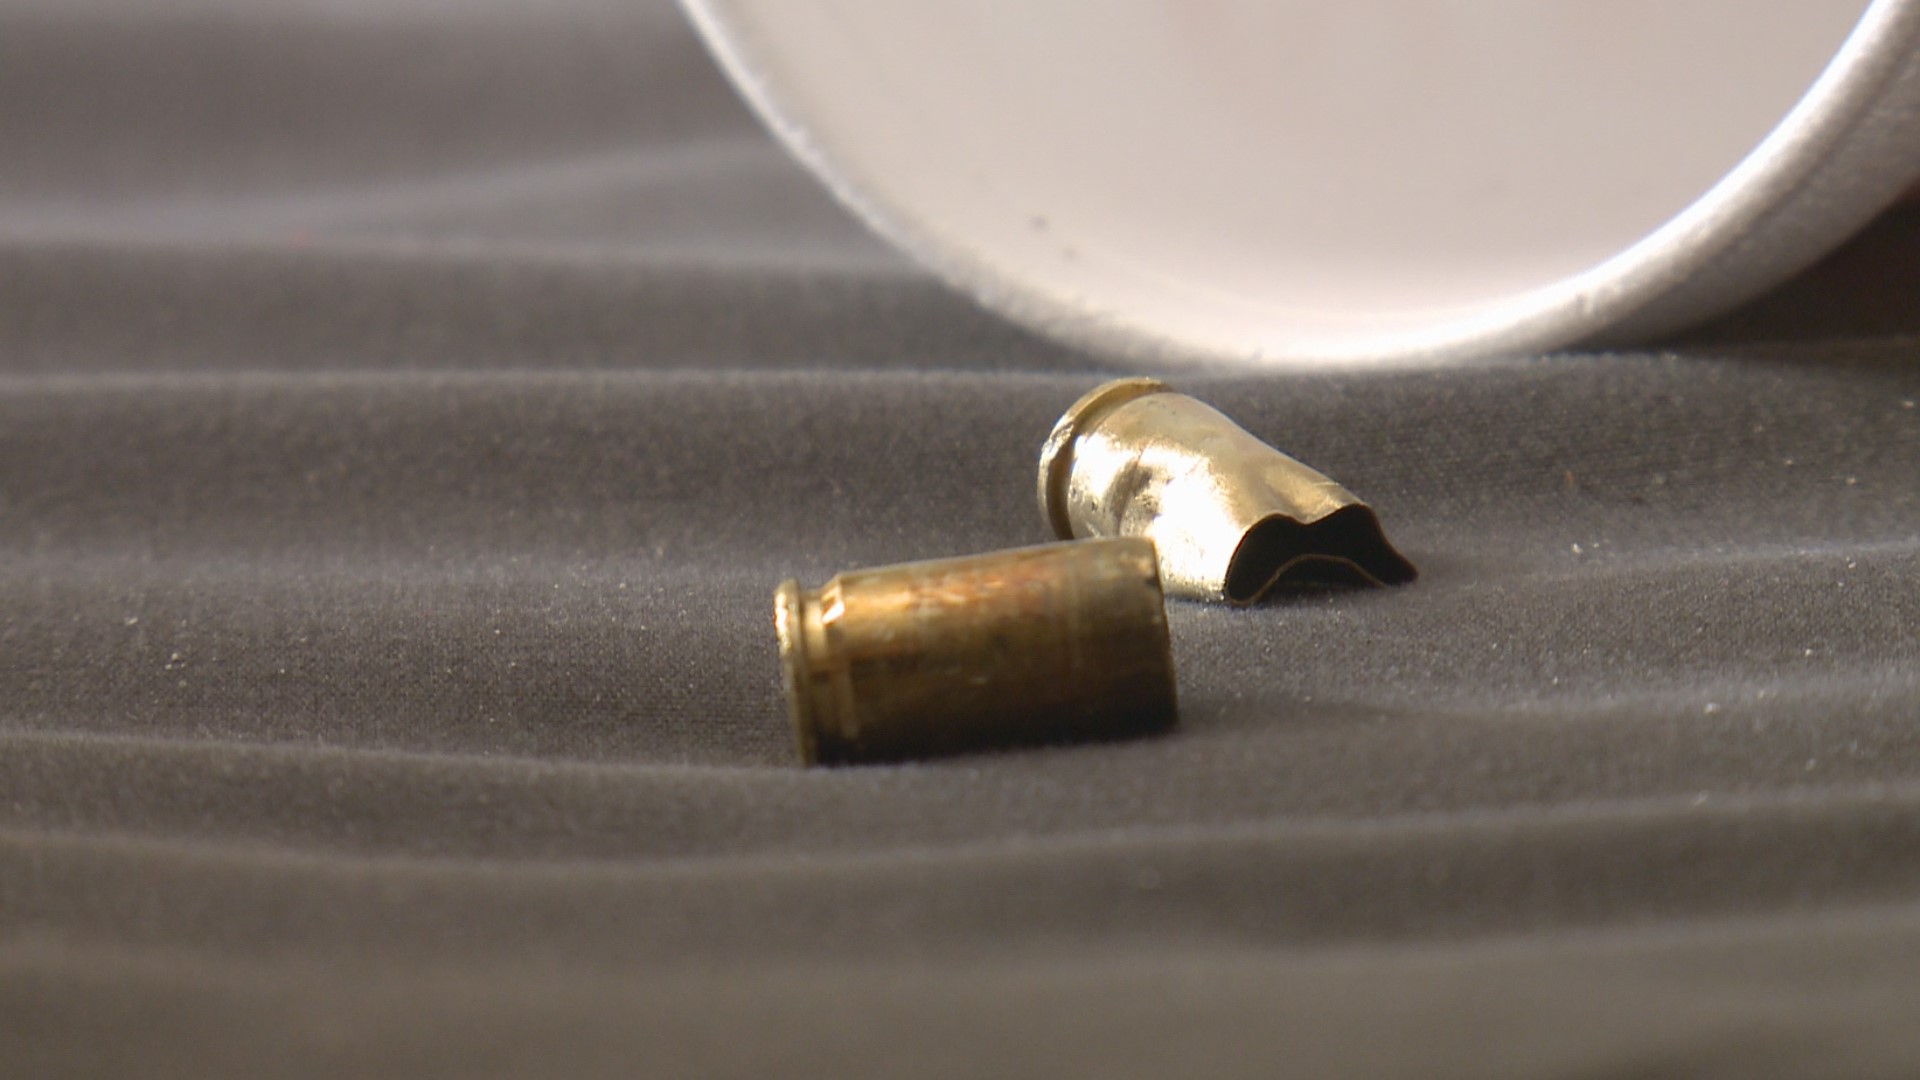 Louisville grandma said she was sleeping in her home when bullets started to fly outside and one landed on her pillowcase as she was sleeping.